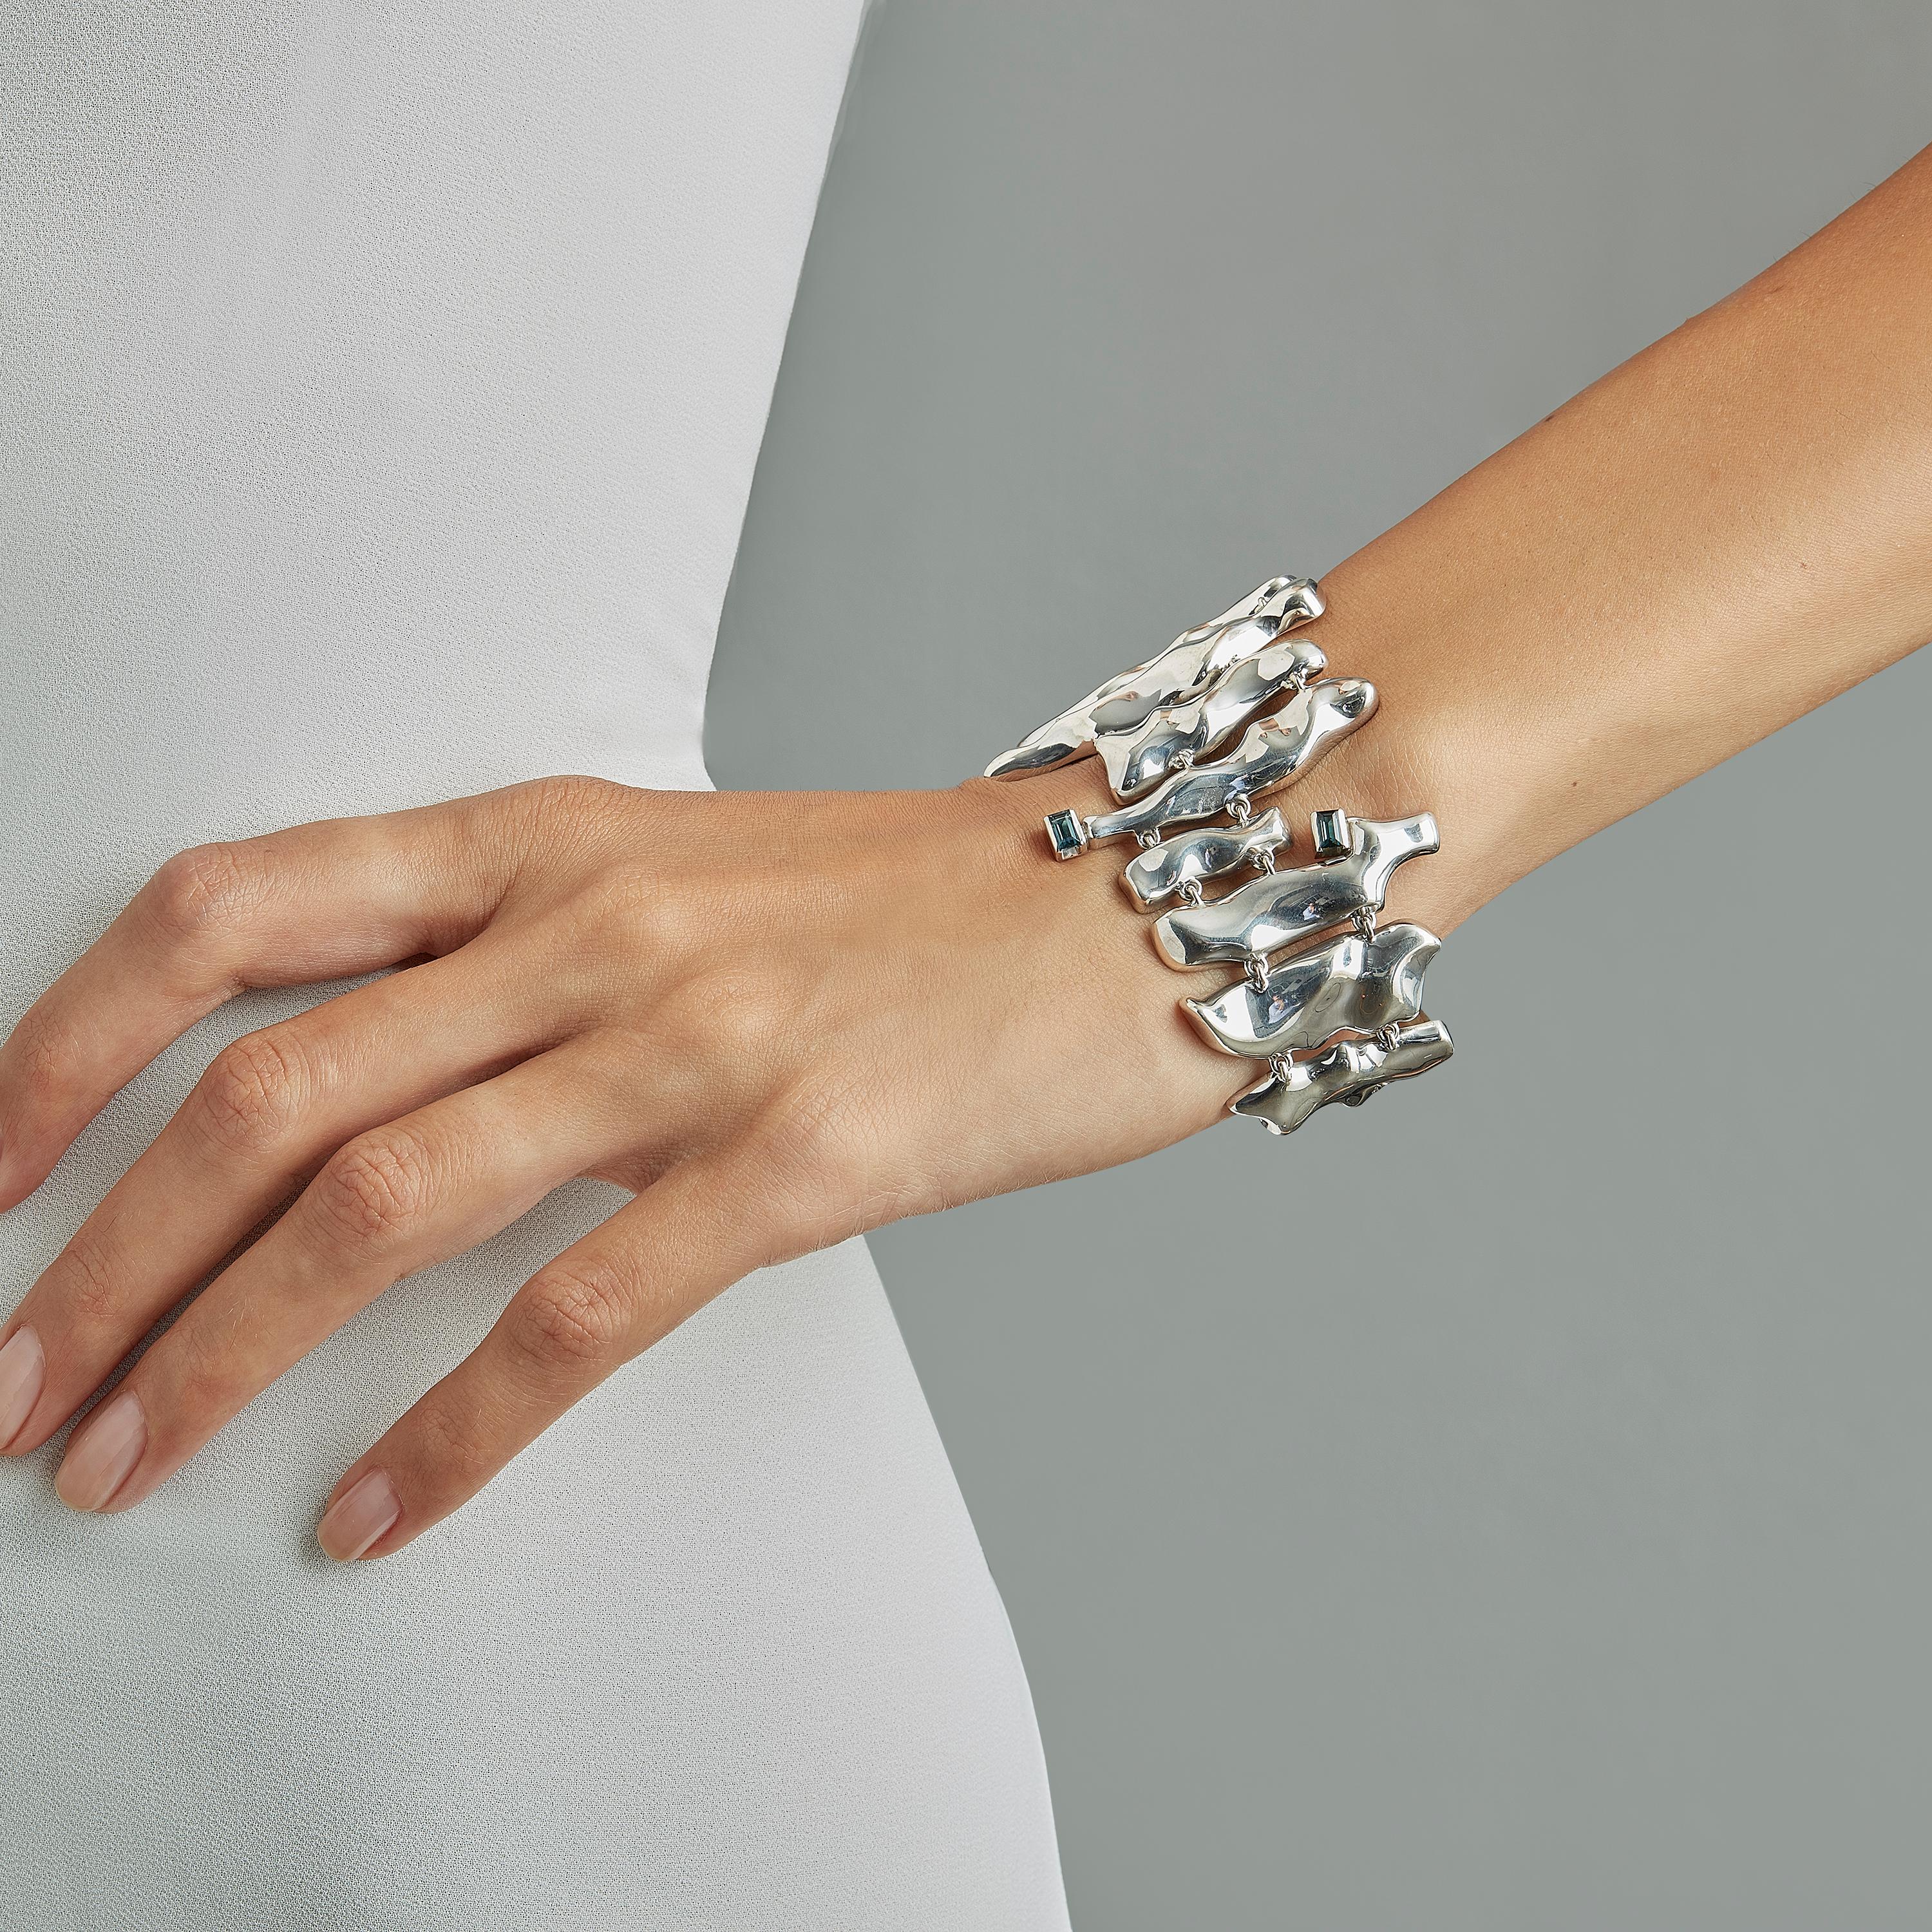 Made by hand in Nathalie Jean's Milan atelier in limited edition, Mercure cuff Bracelet is composed of 16 cleverly articulated elements of varying dimensions wrapping nicely around the wrist. Small, delicate, ebbing sculptures in rhodium plated